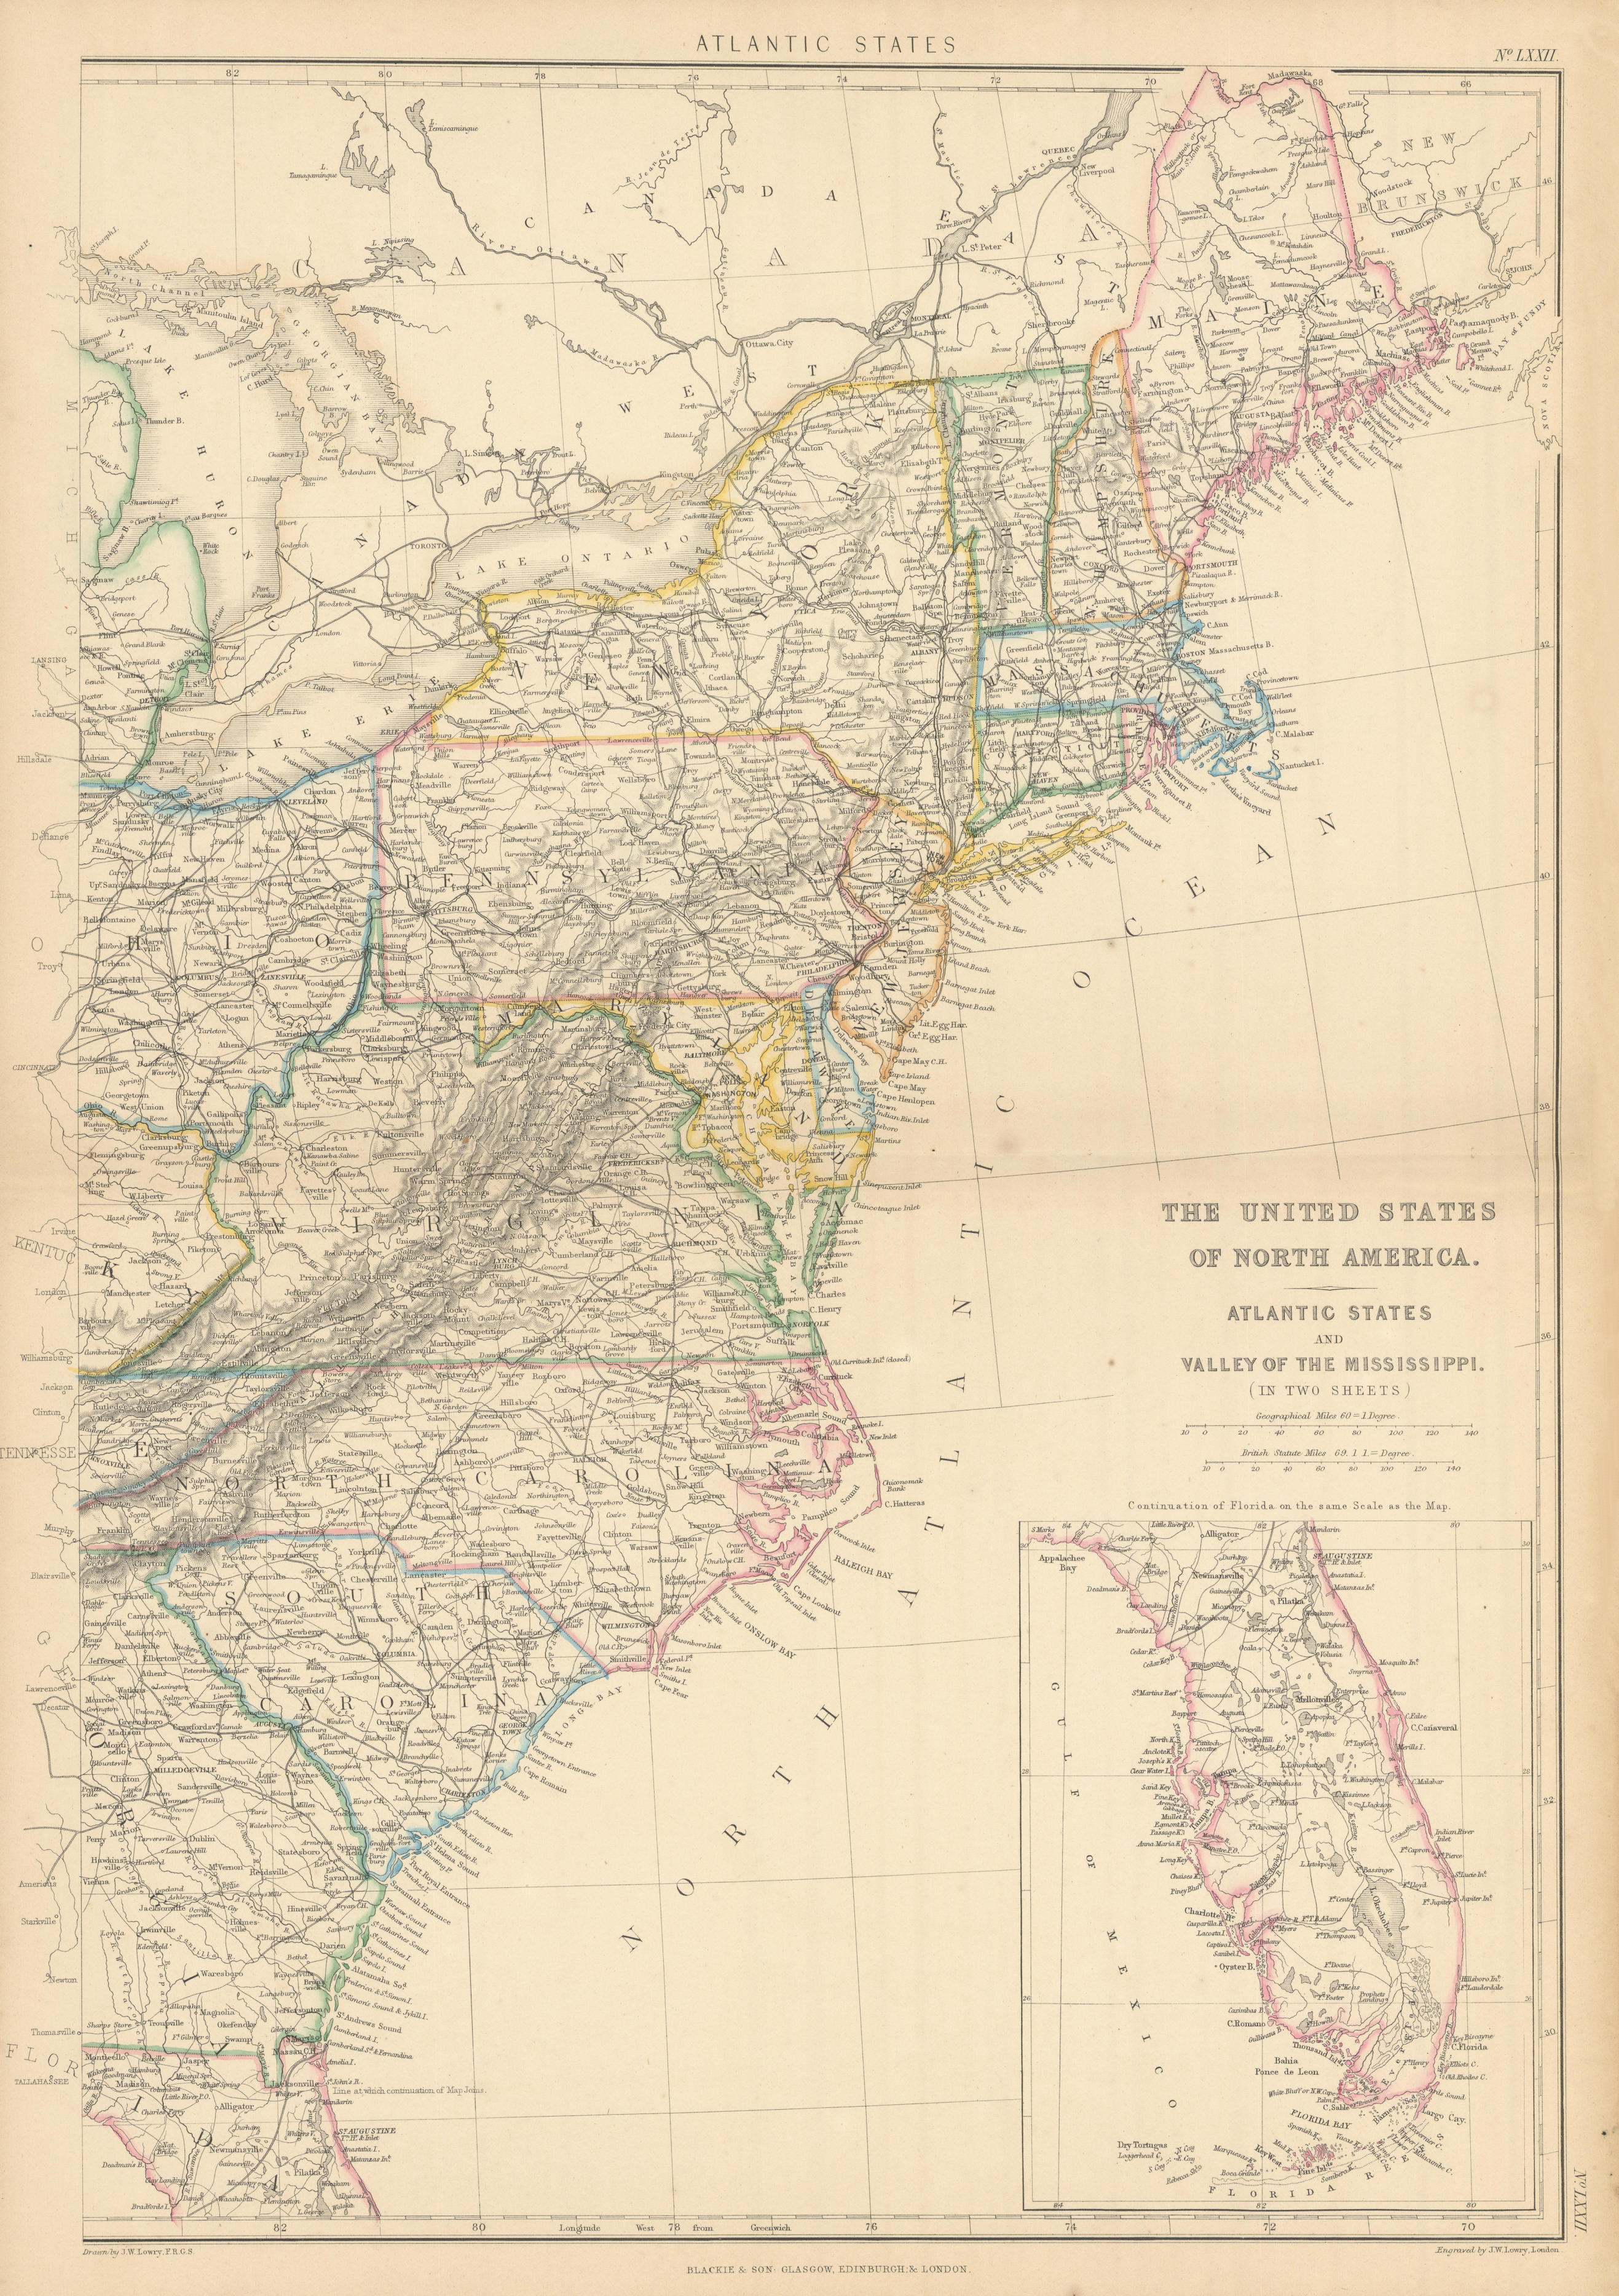 Associate Product The United States of North America. USA Atlantic States. LOWRY 1859 old map